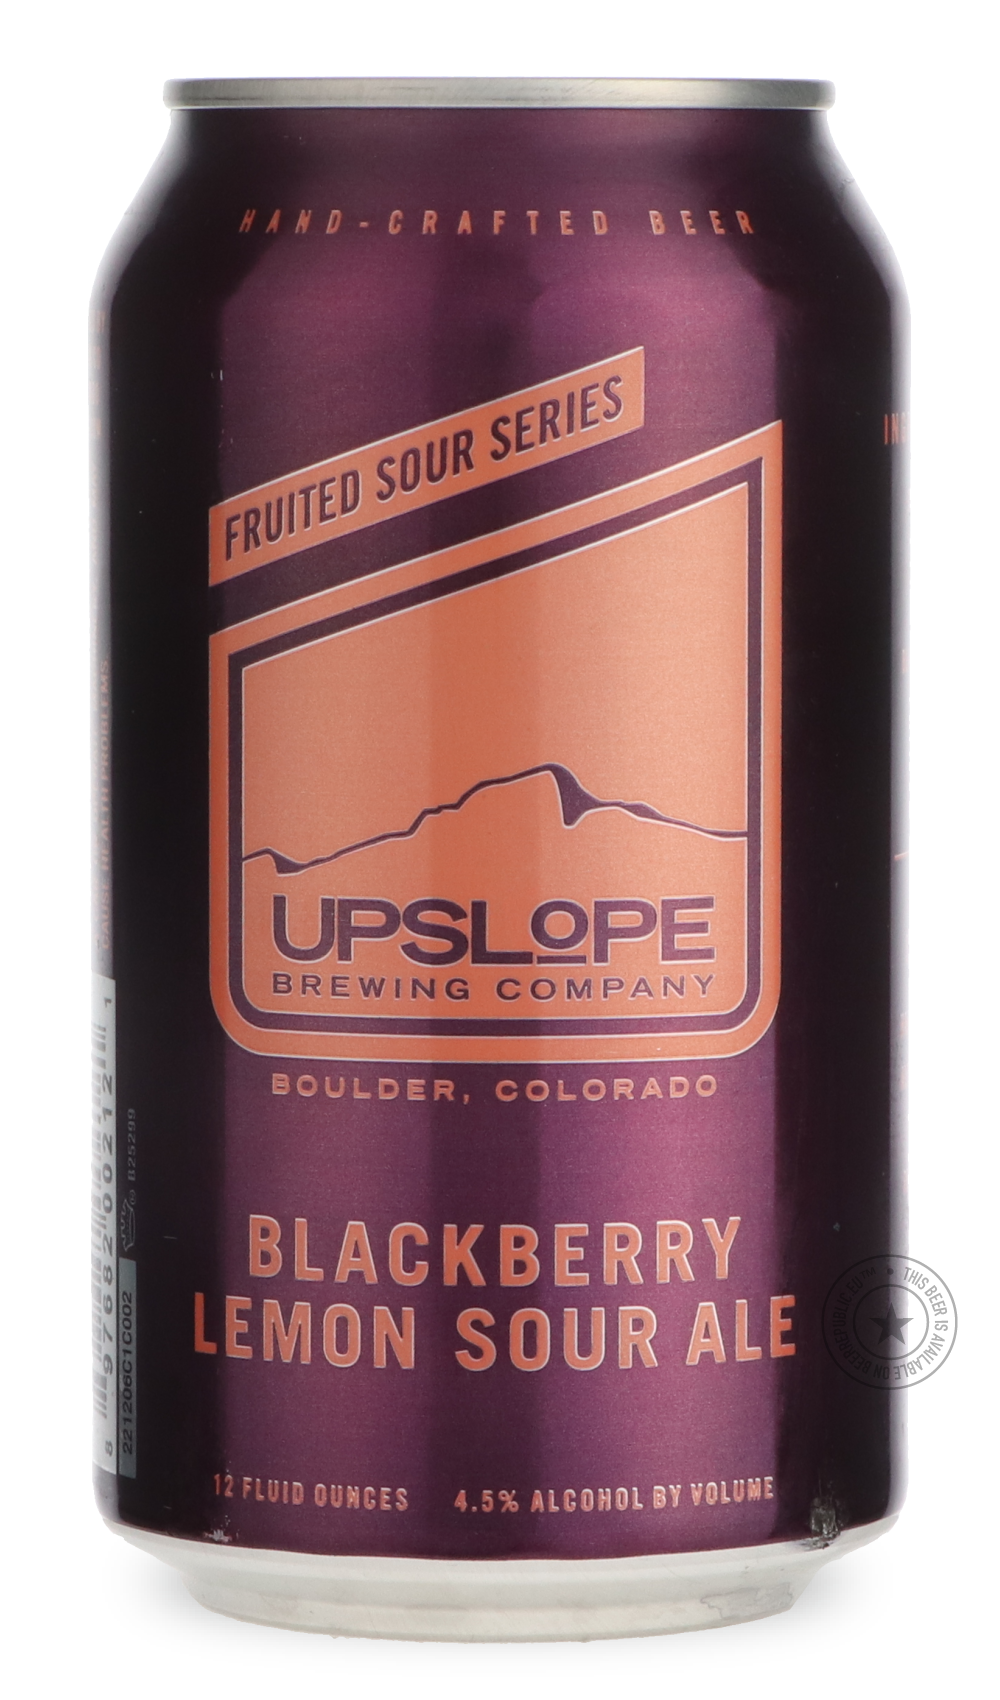 -Upslope- Blackberry Lemon Sour-Sour / Wild & Fruity- Only @ Beer Republic - The best online beer store for American & Canadian craft beer - Buy beer online from the USA and Canada - Bier online kopen - Amerikaans bier kopen - Craft beer store - Craft beer kopen - Amerikanisch bier kaufen - Bier online kaufen - Acheter biere online - IPA - Stout - Porter - New England IPA - Hazy IPA - Imperial Stout - Barrel Aged - Barrel Aged Imperial Stout - Brown - Dark beer - Blond - Blonde - Pilsner - Lager - Wheat - W